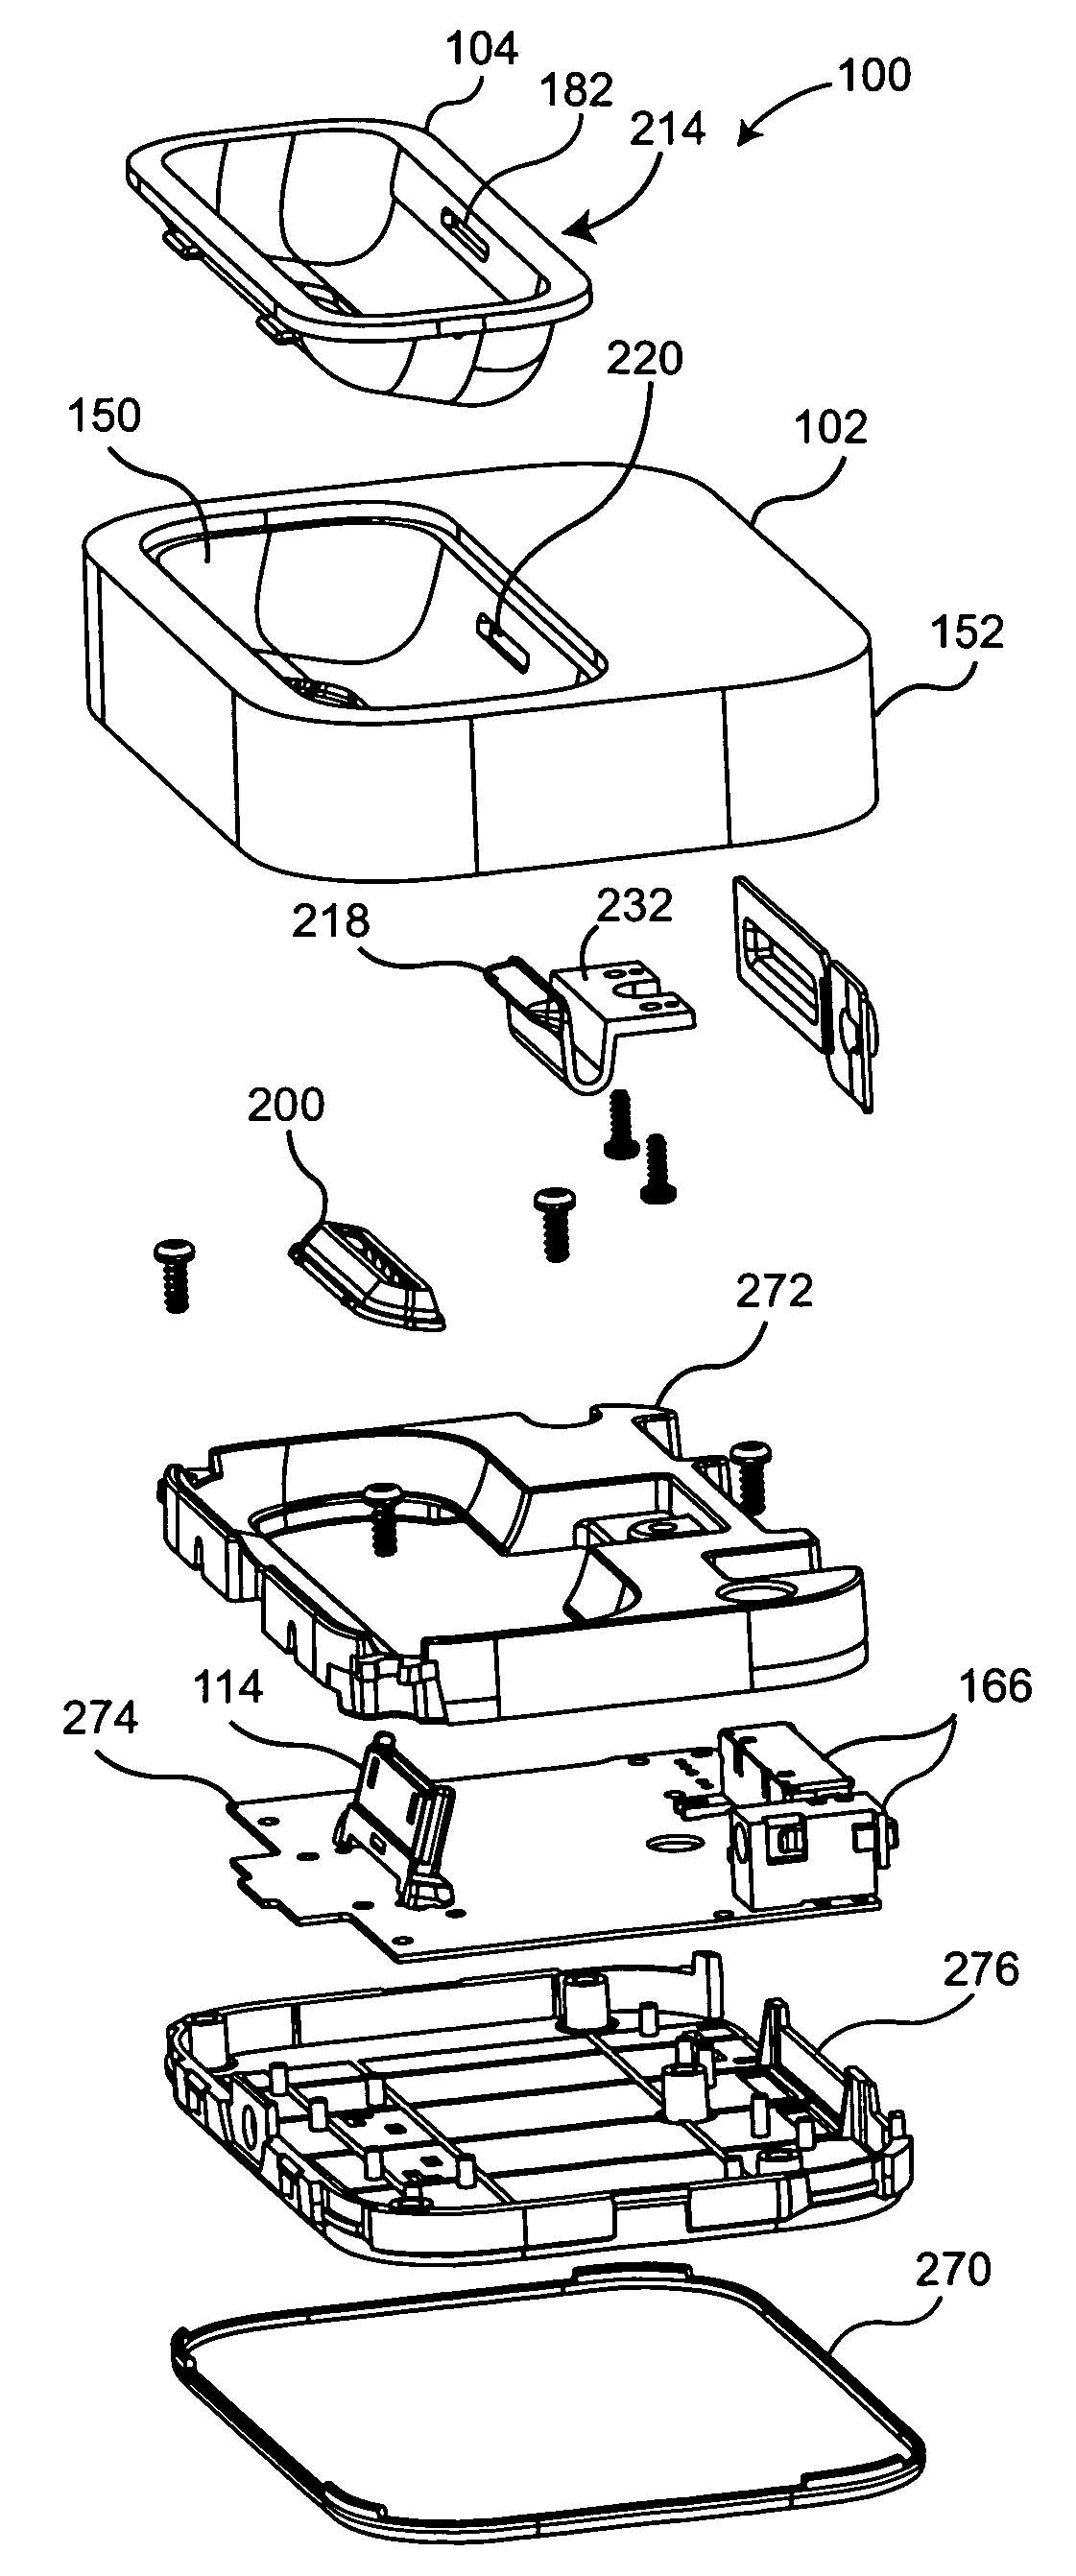 Docking station for hand held electronic devices